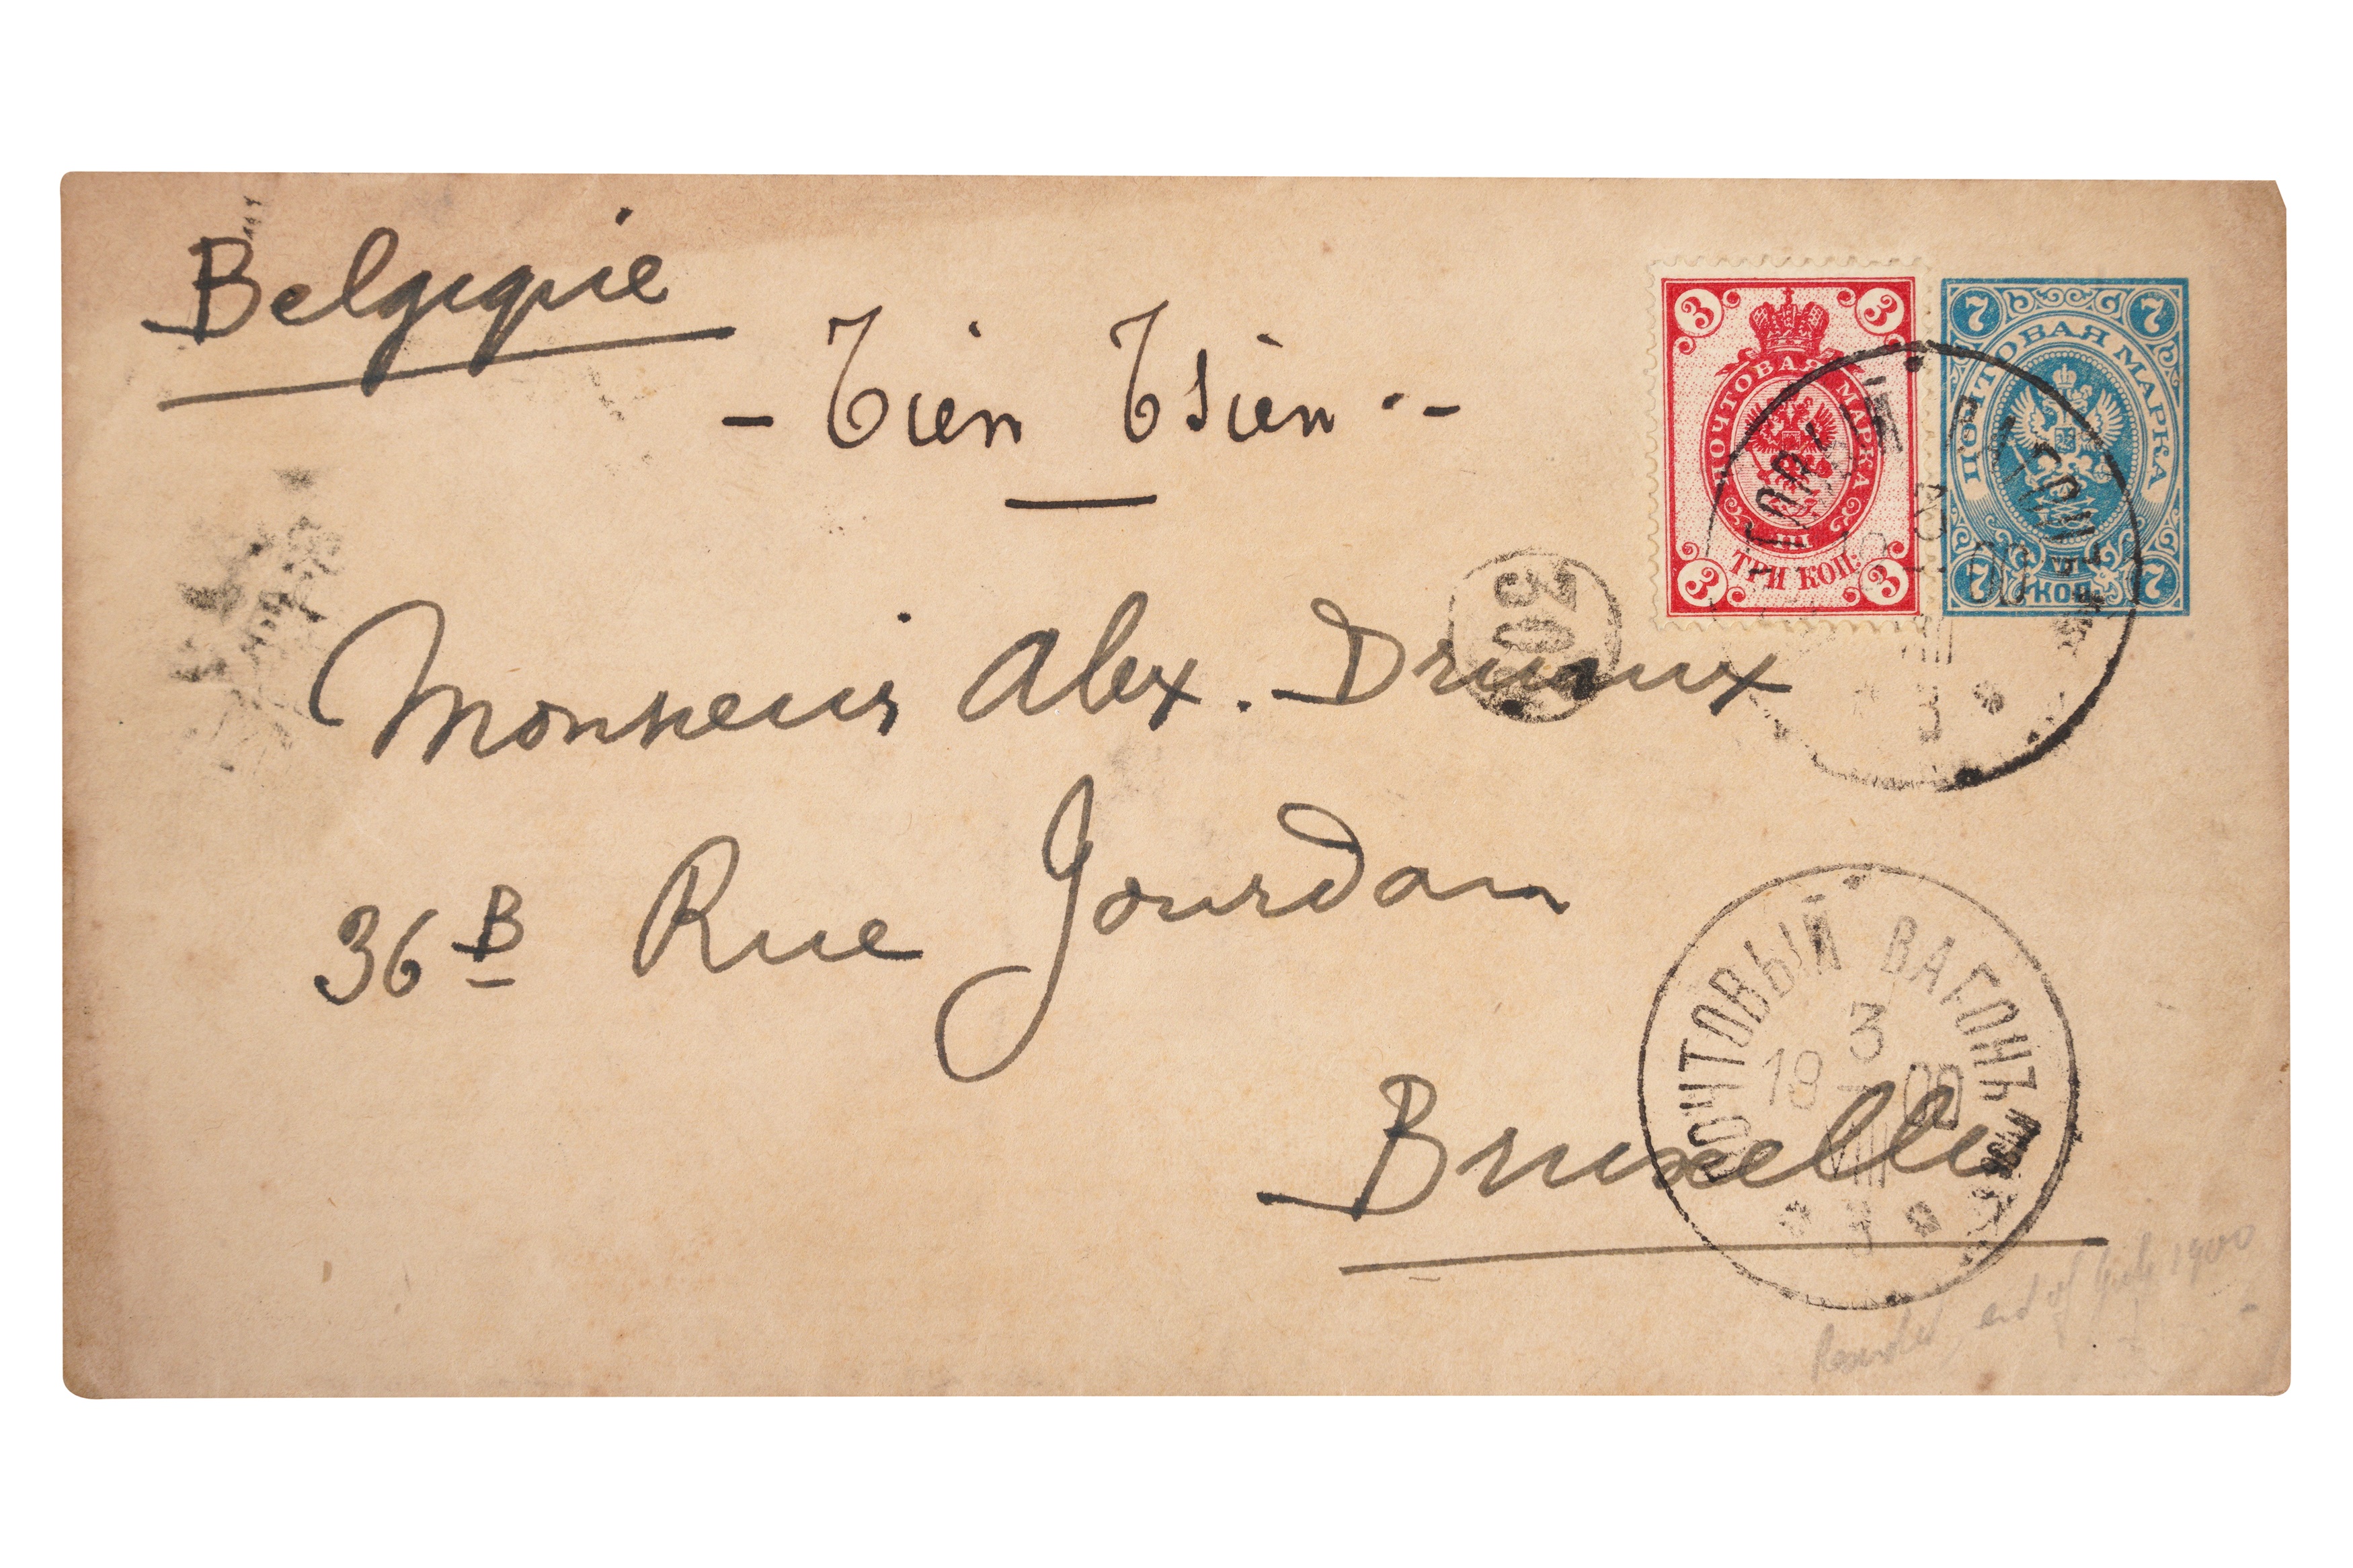 RUSSIAN P.O CHINA STATIONERY 1900 BELGIAN CONSUL TIENTSIN Preview: Barley Mow